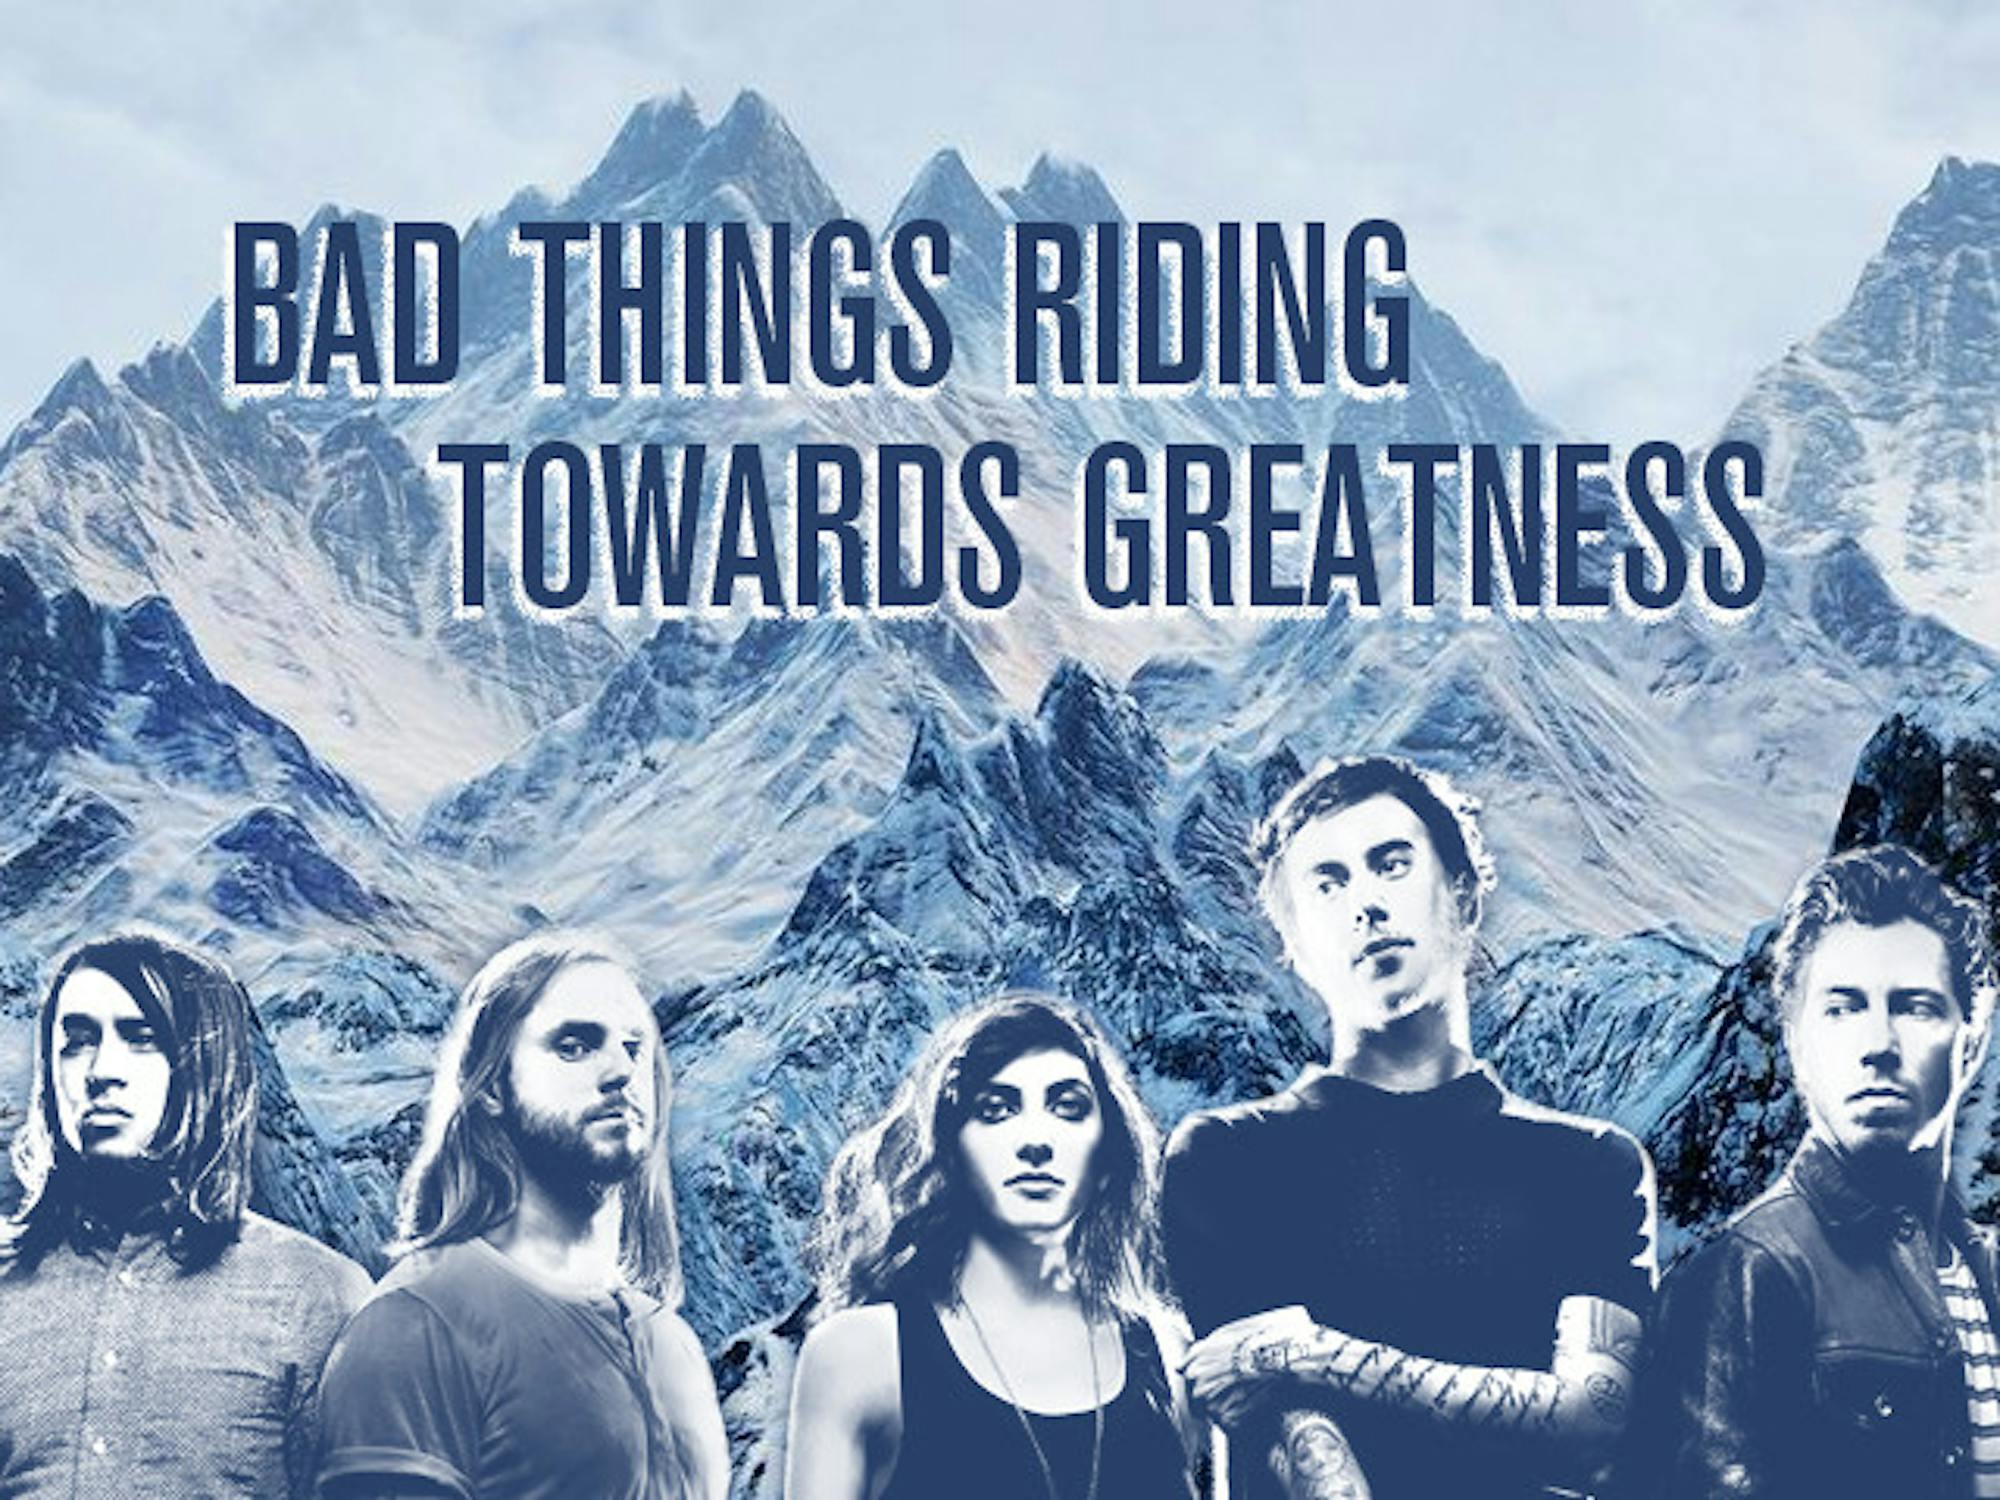 wbe_bad things riding towards greatness_9-16-2014